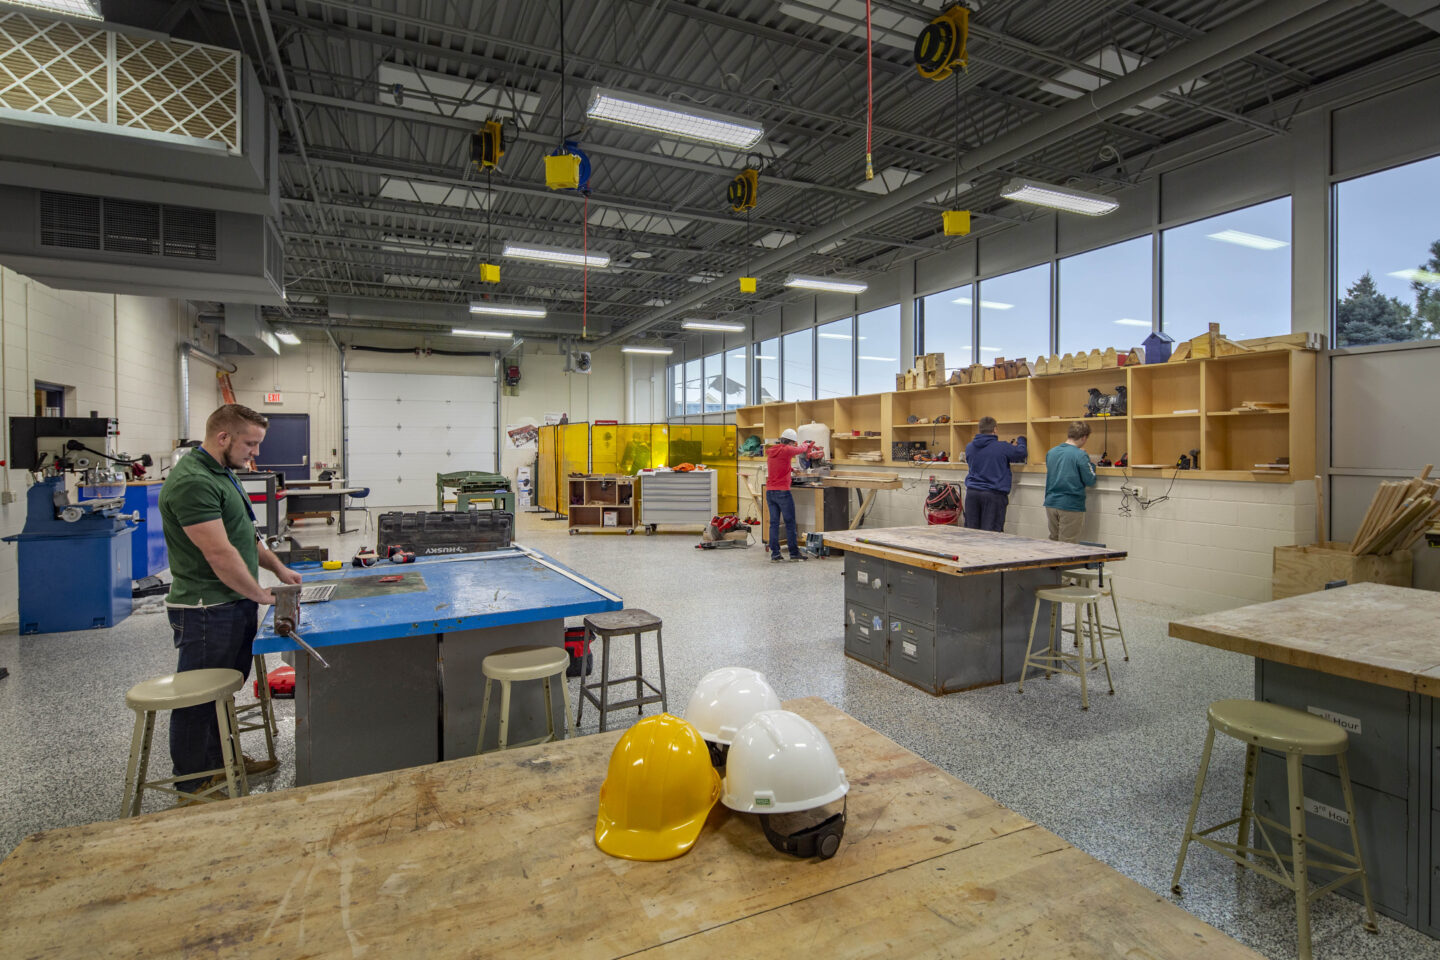 A large shop with windows and a garage door holds a variety of equipment for students to learn trades at Whitnall High School